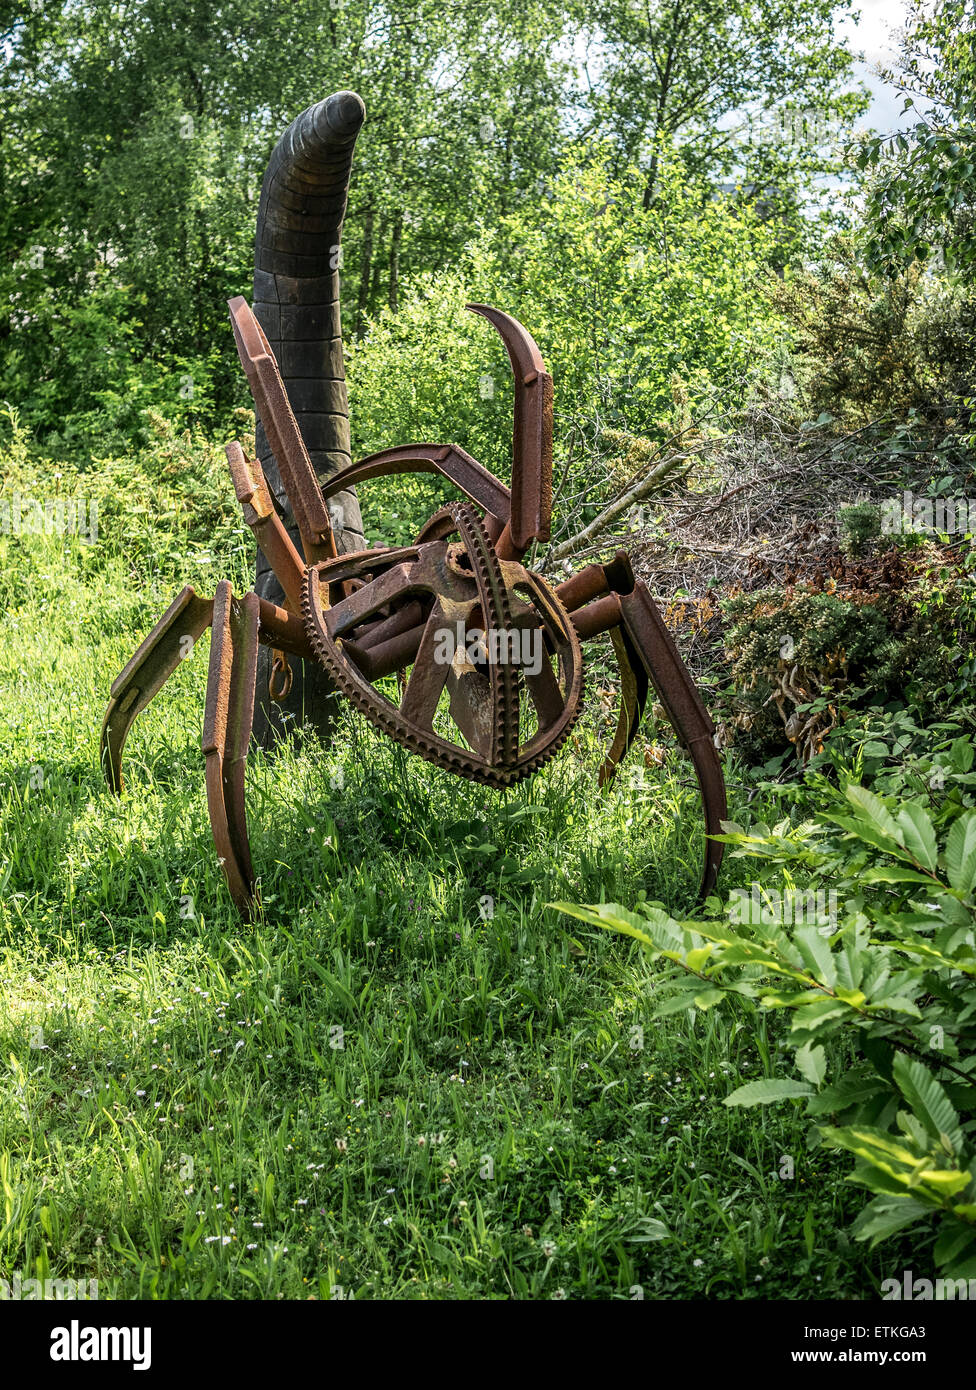 Giant Spider Sculpture, Shorne Wood Country Park Stock Photo